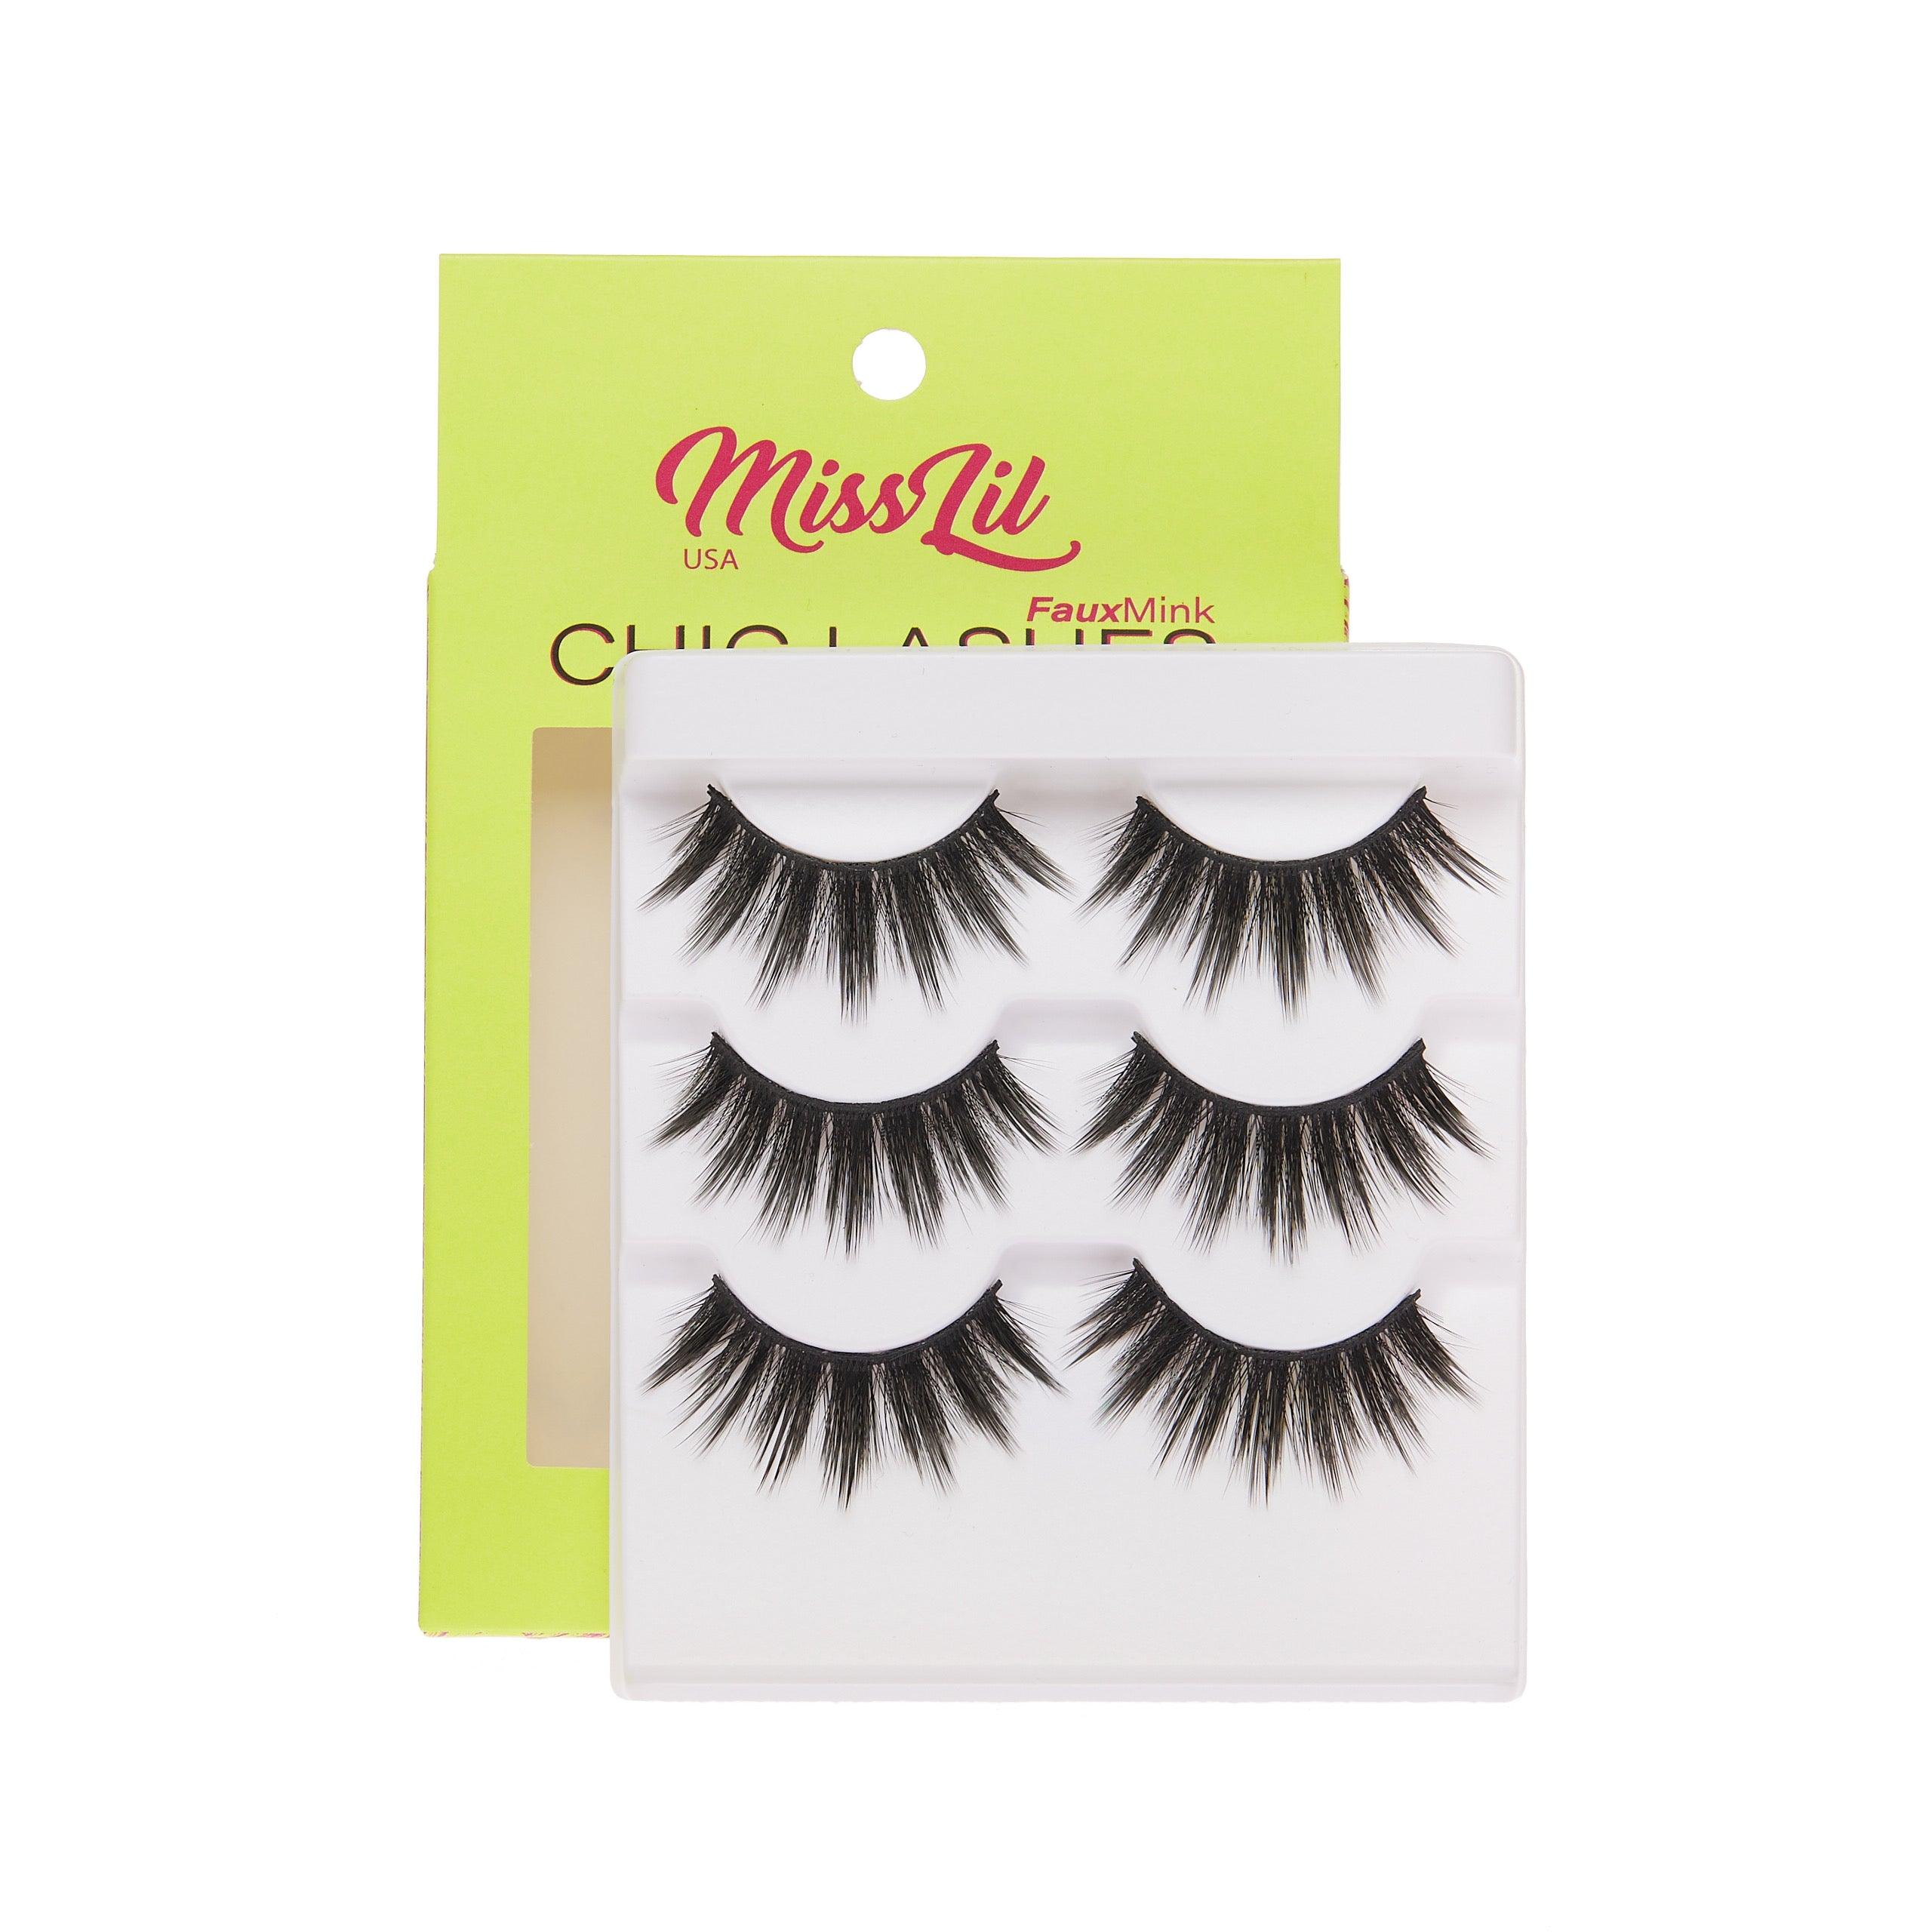 3-Pair Faux Mink Eyelashes - Chic Lashes Collection #19 - Pack of 3 - Miss Lil USA